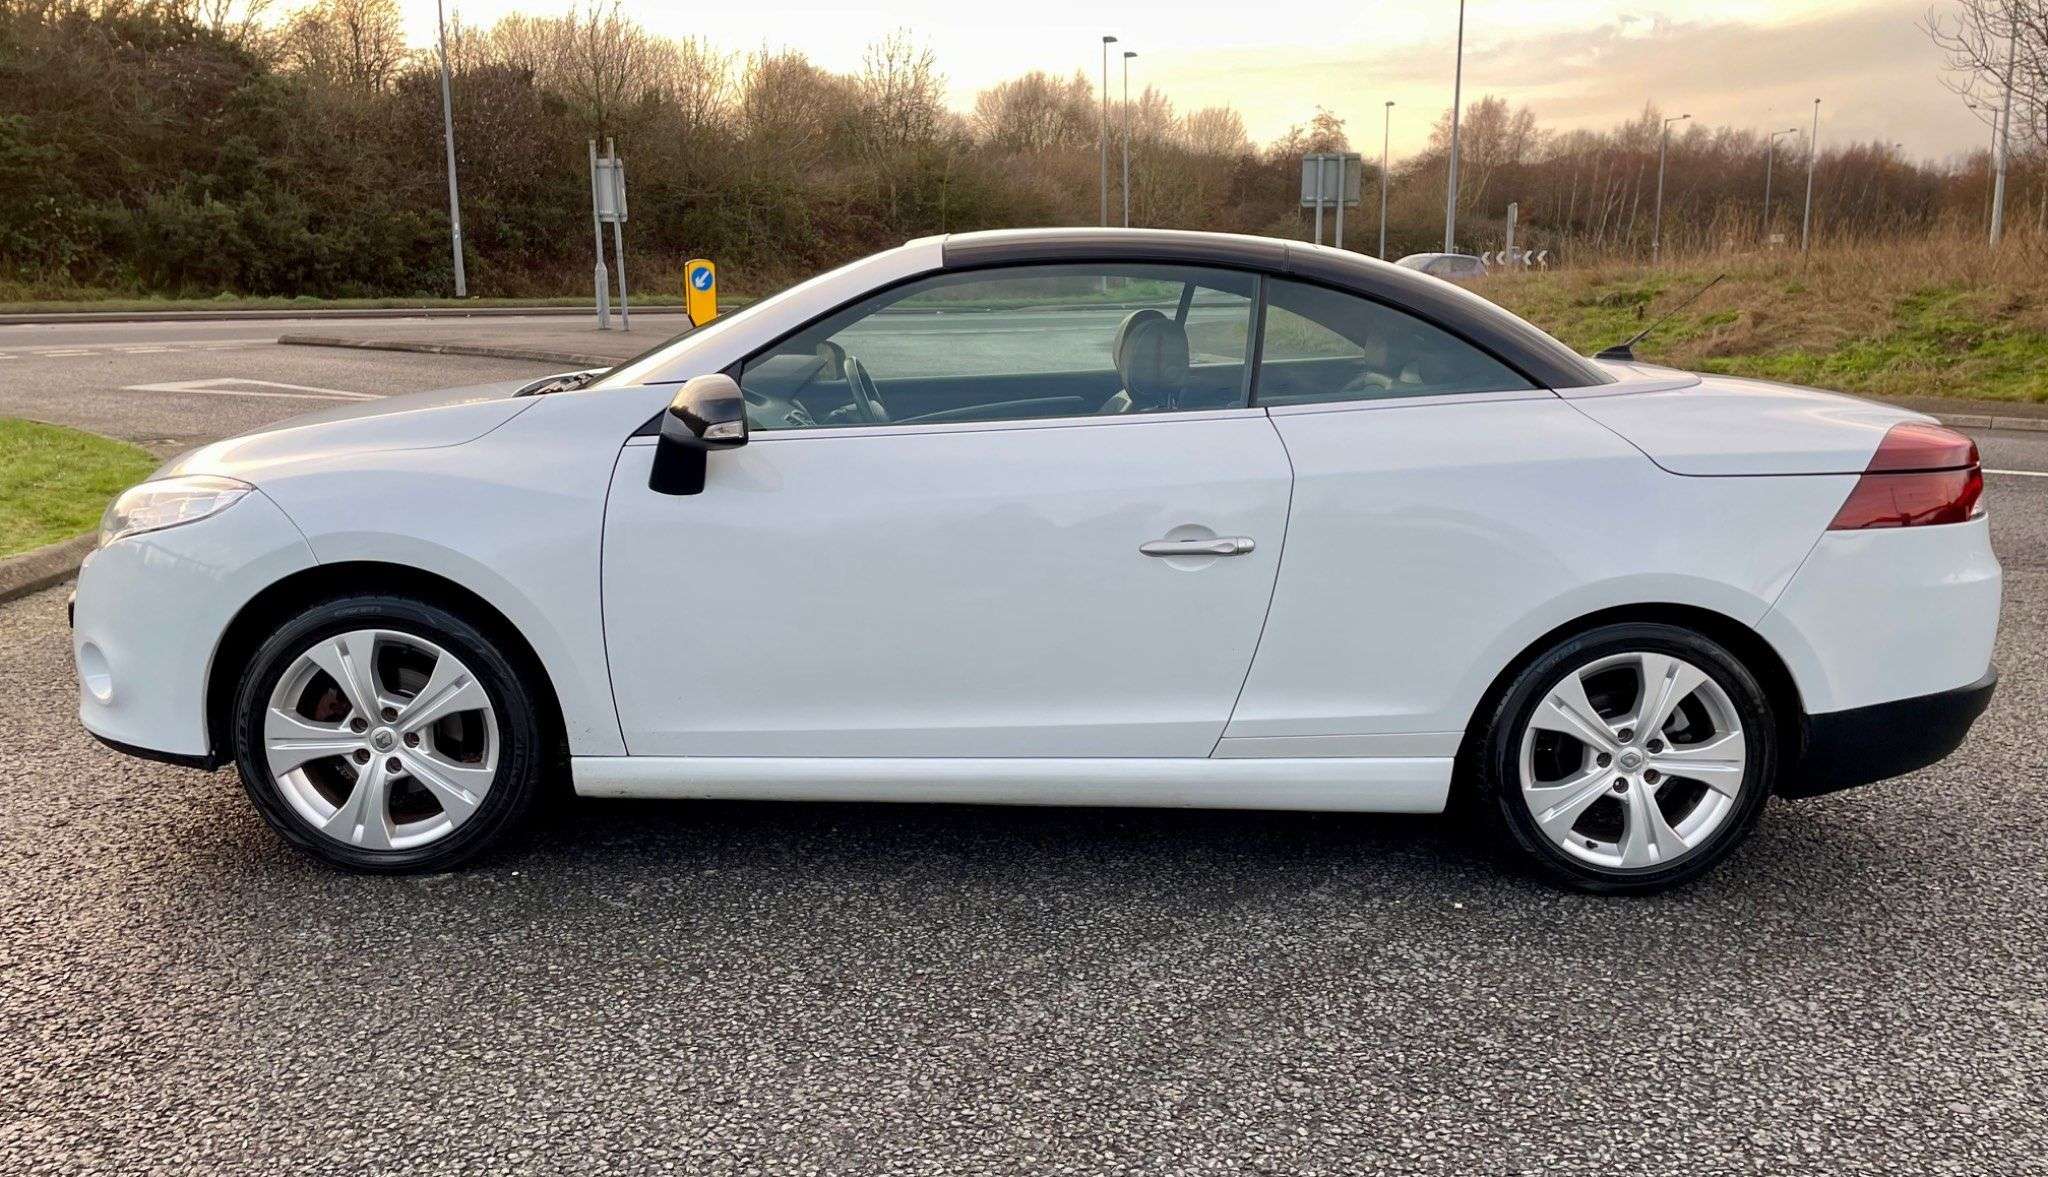 1.4 Renault Megane Convertible for sale